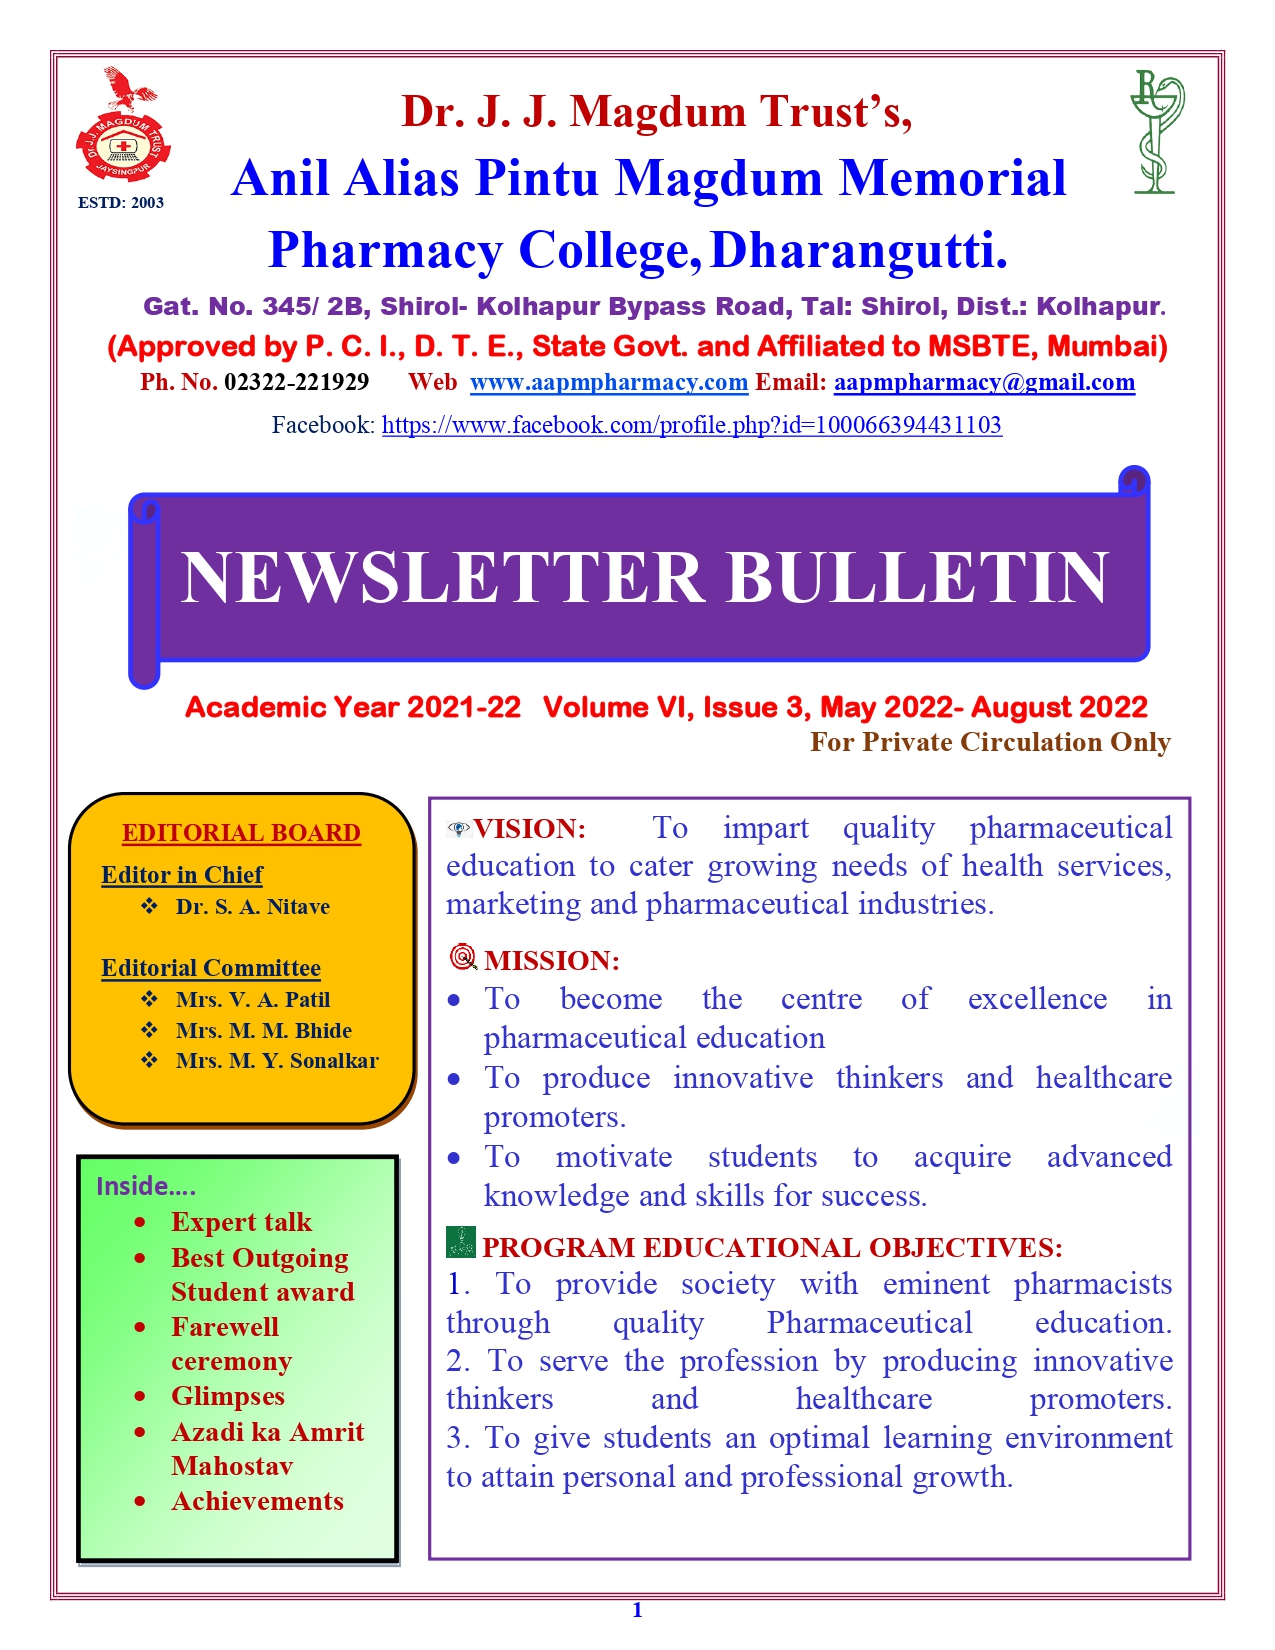 Bulletin MAY-AUGUST 2022